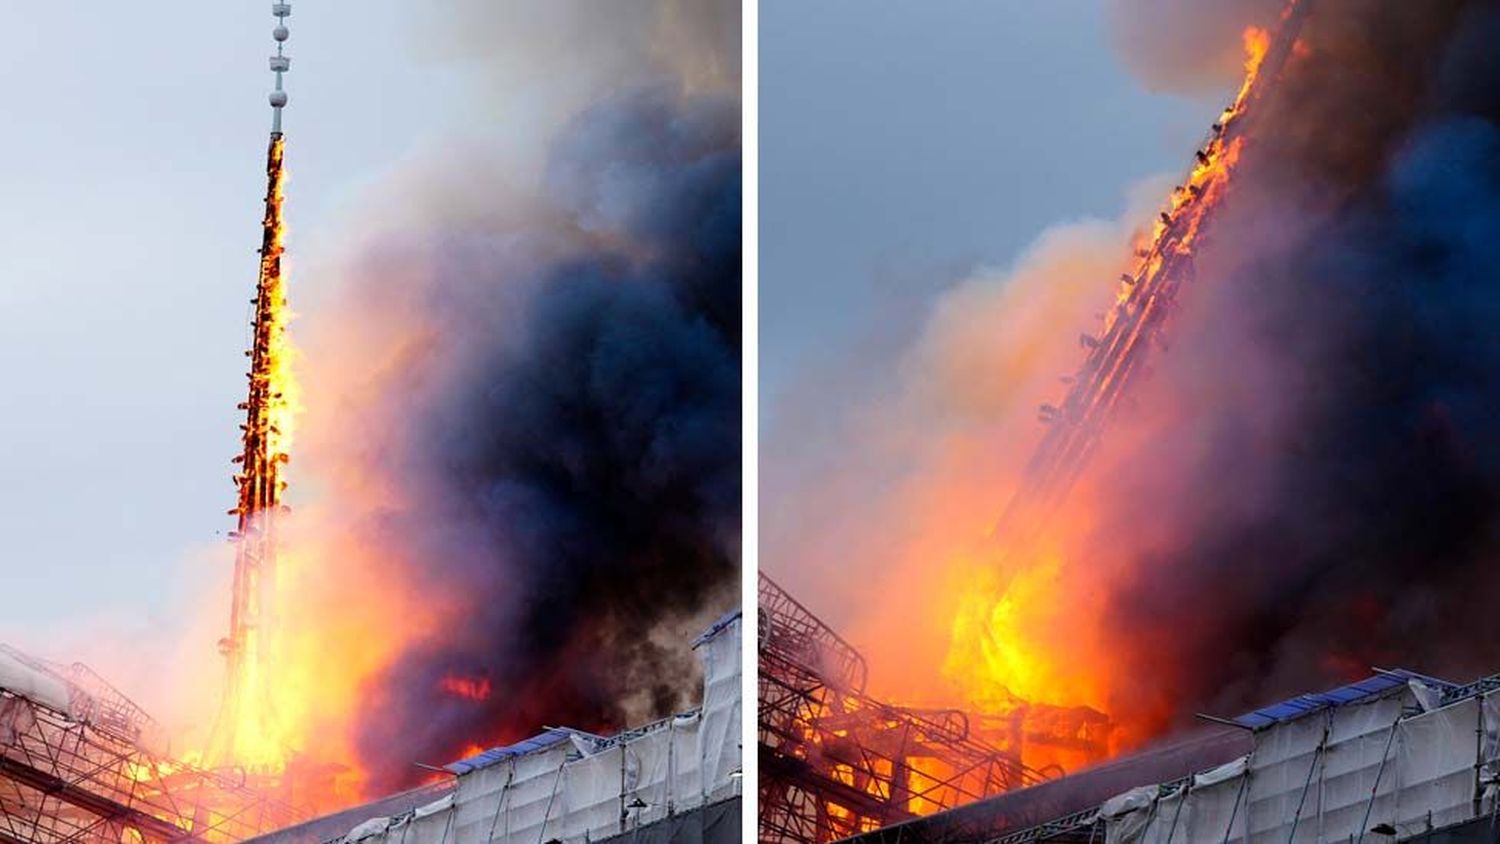 Fire engulfed the historic dragon spire which then collapsed